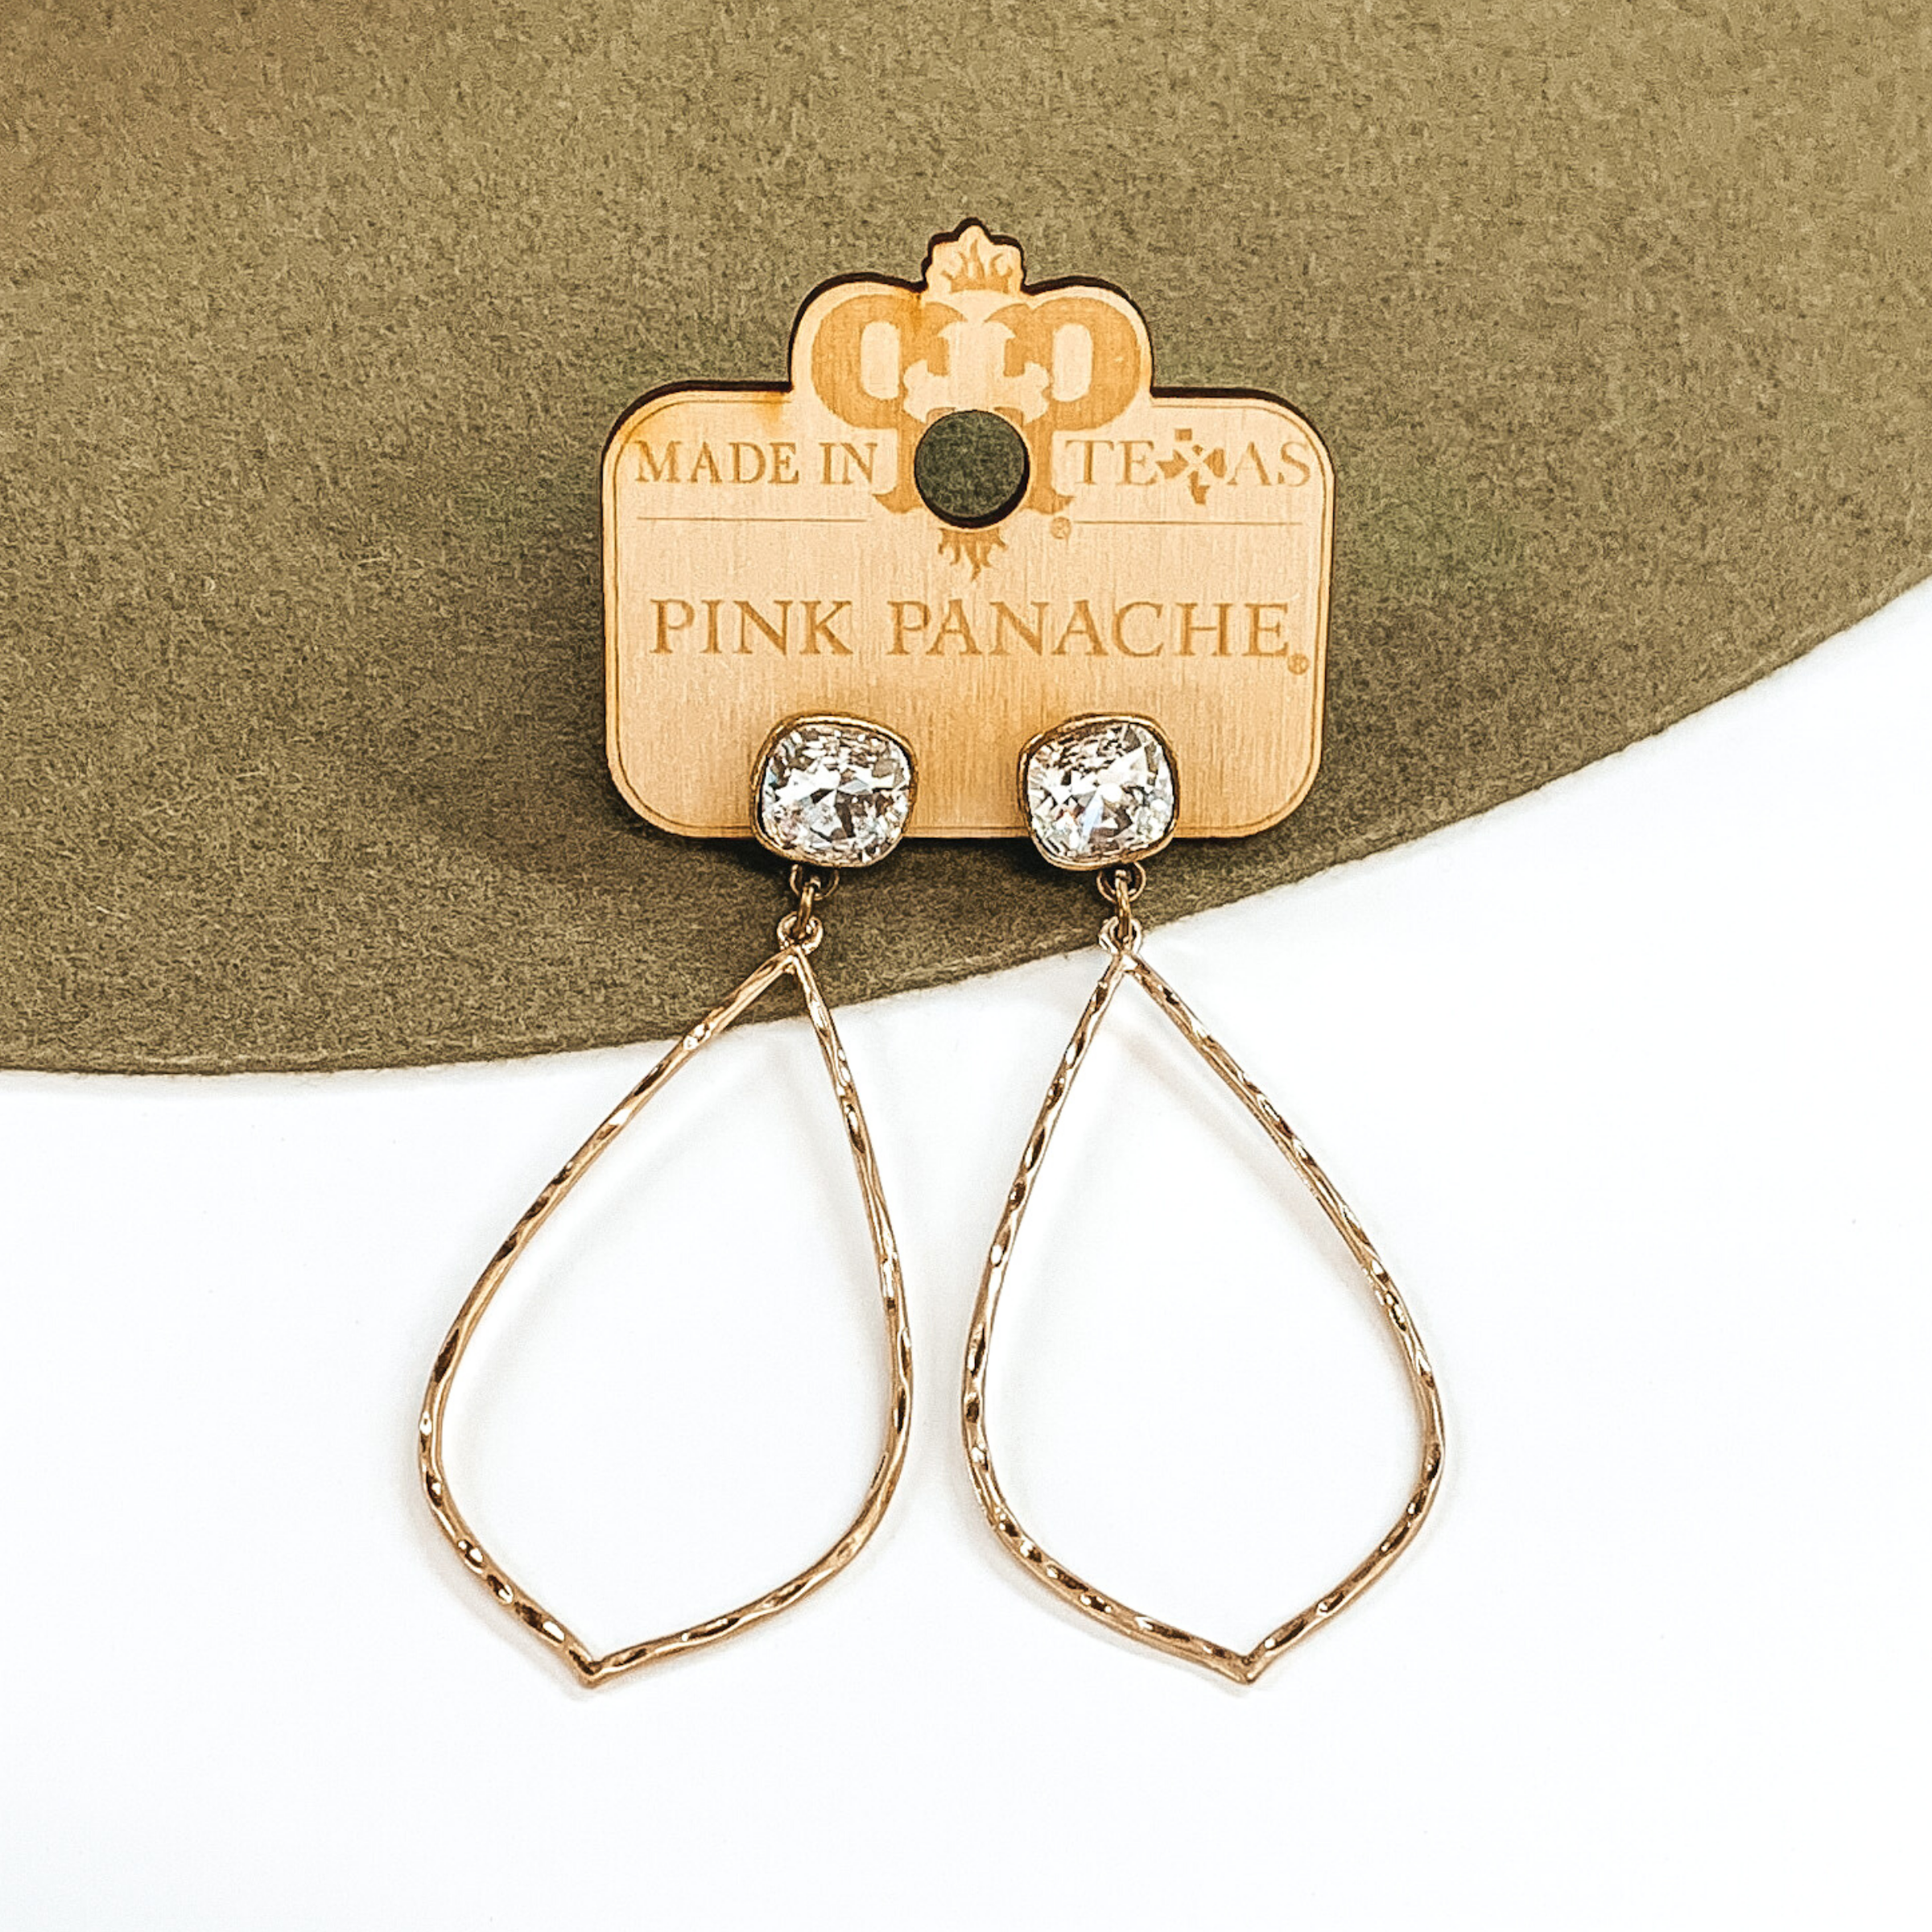 Bronze stud earrings with square clear crystals that has a thin, hammered teardrop outline pendant that hangs from the studs. This pair of earrings are pictured on a white and olive background. 